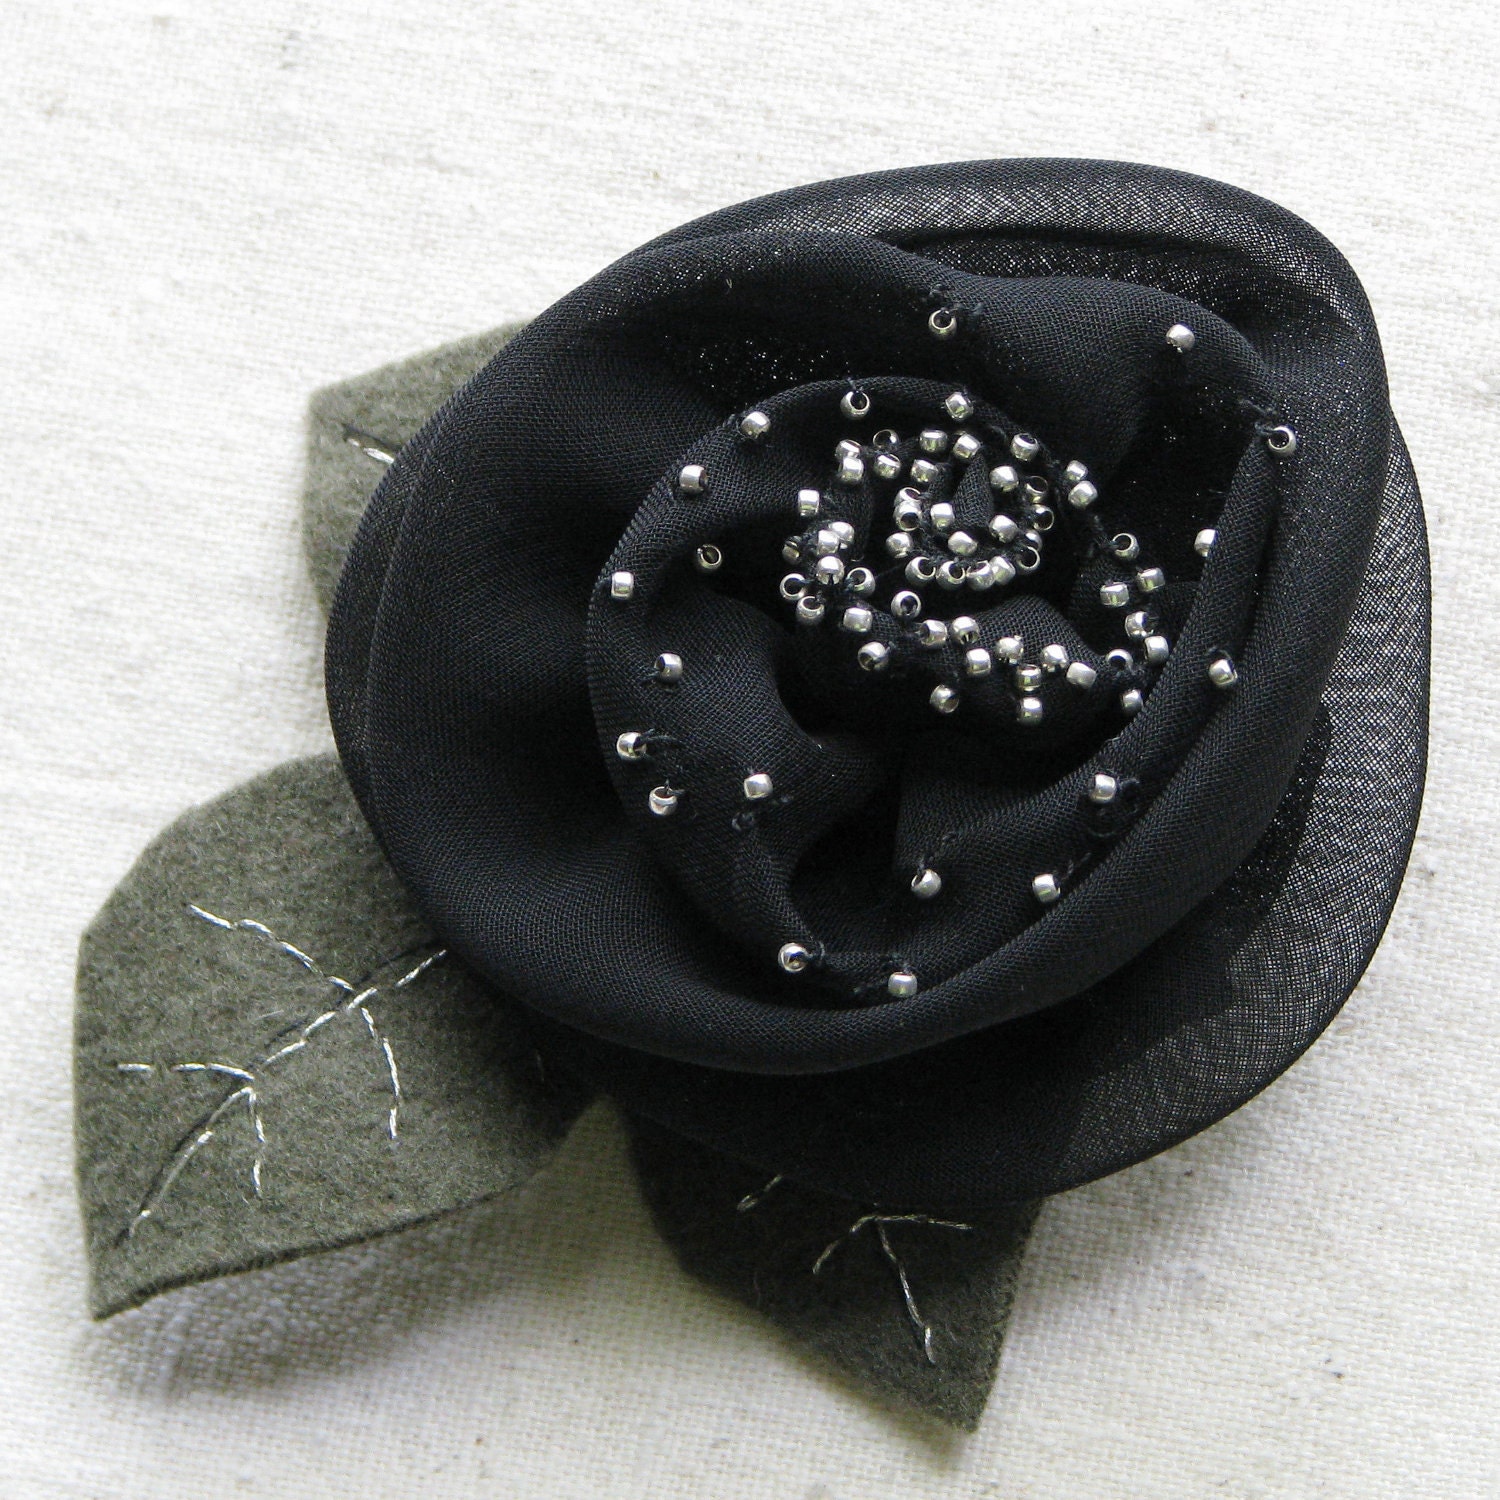 Black rose hair clip, chiffon fabric embellished with silver beads, embroidered moss green felt leaves, large